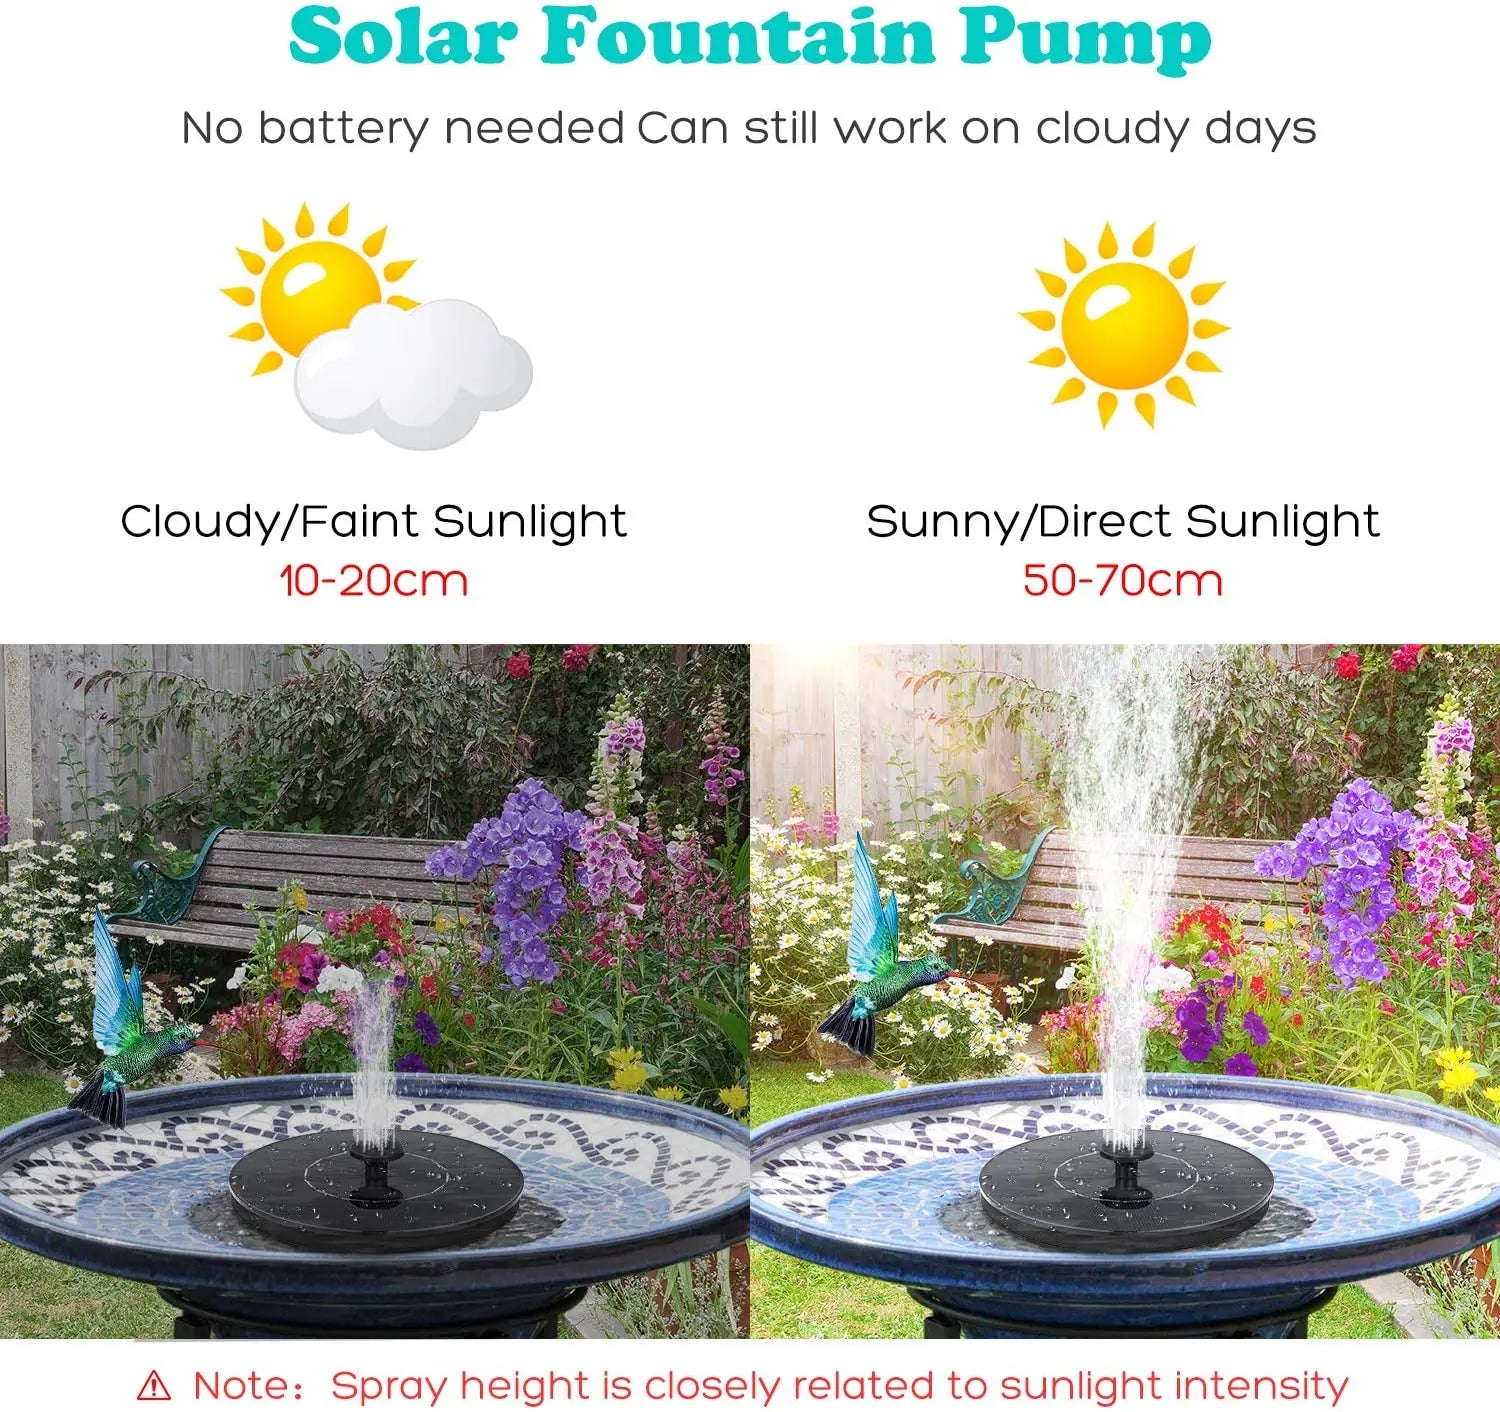 Floating Solar Fountain, Solar-powered fountain pump works in all light conditions, adjusting spray height accordingly.